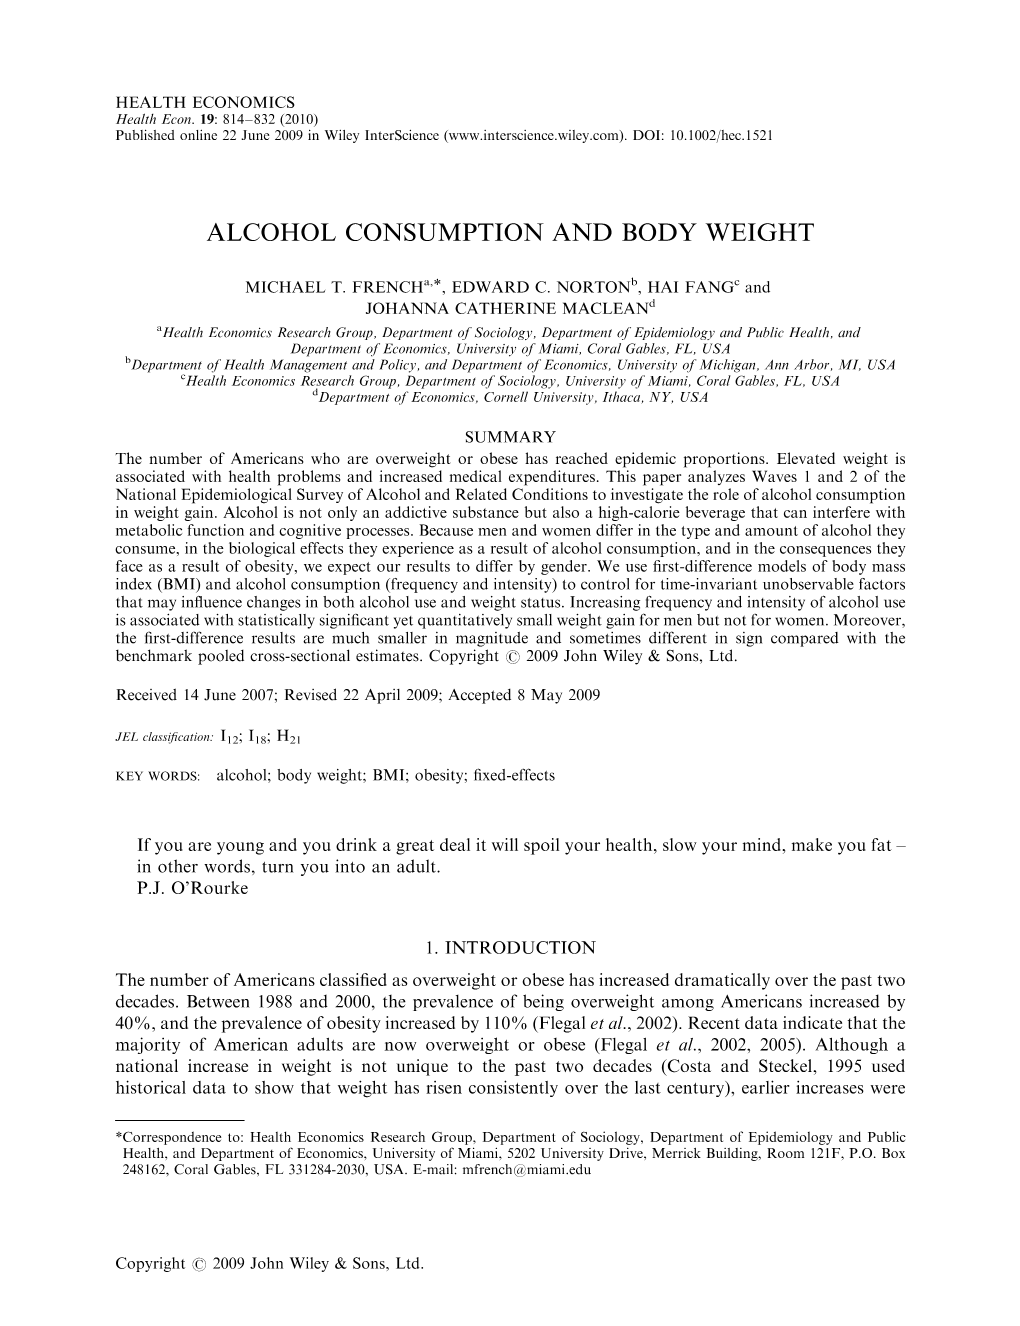 Alcohol Consumption and Body Weight